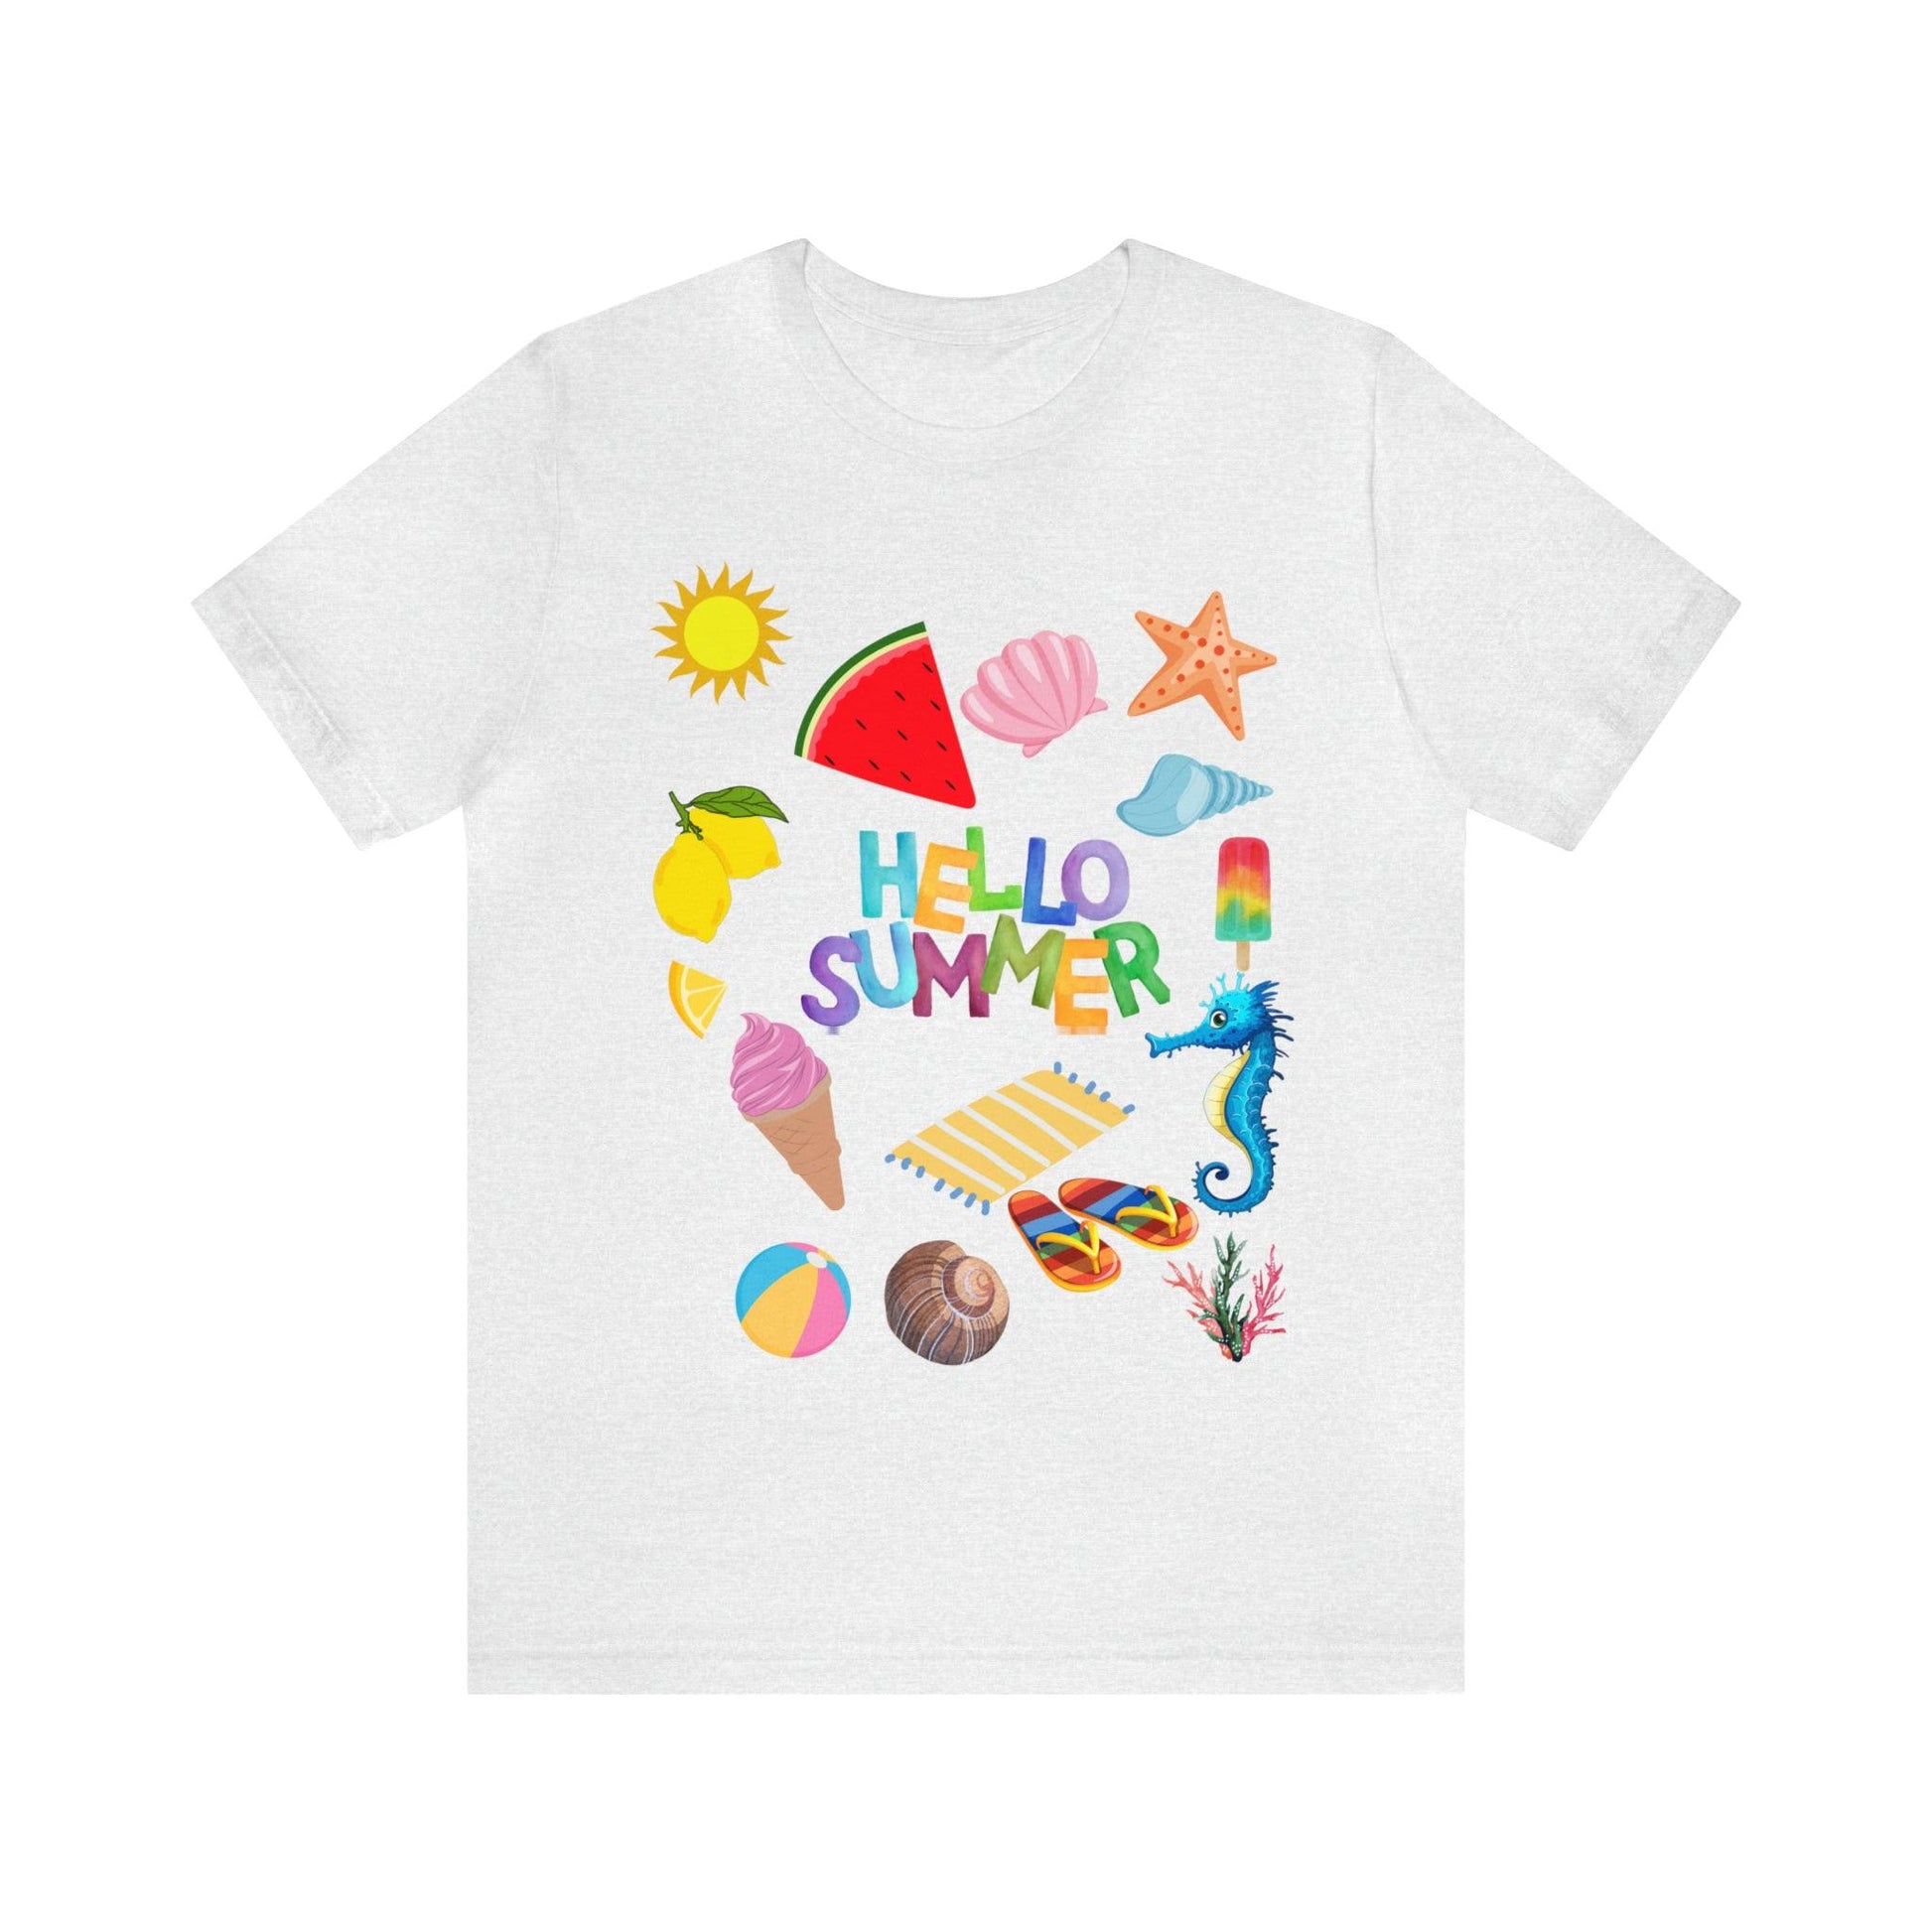 Hello Summer shirt, Funny Summer shirts for women and men, Summer Casual Top Tee - Giftsmojo